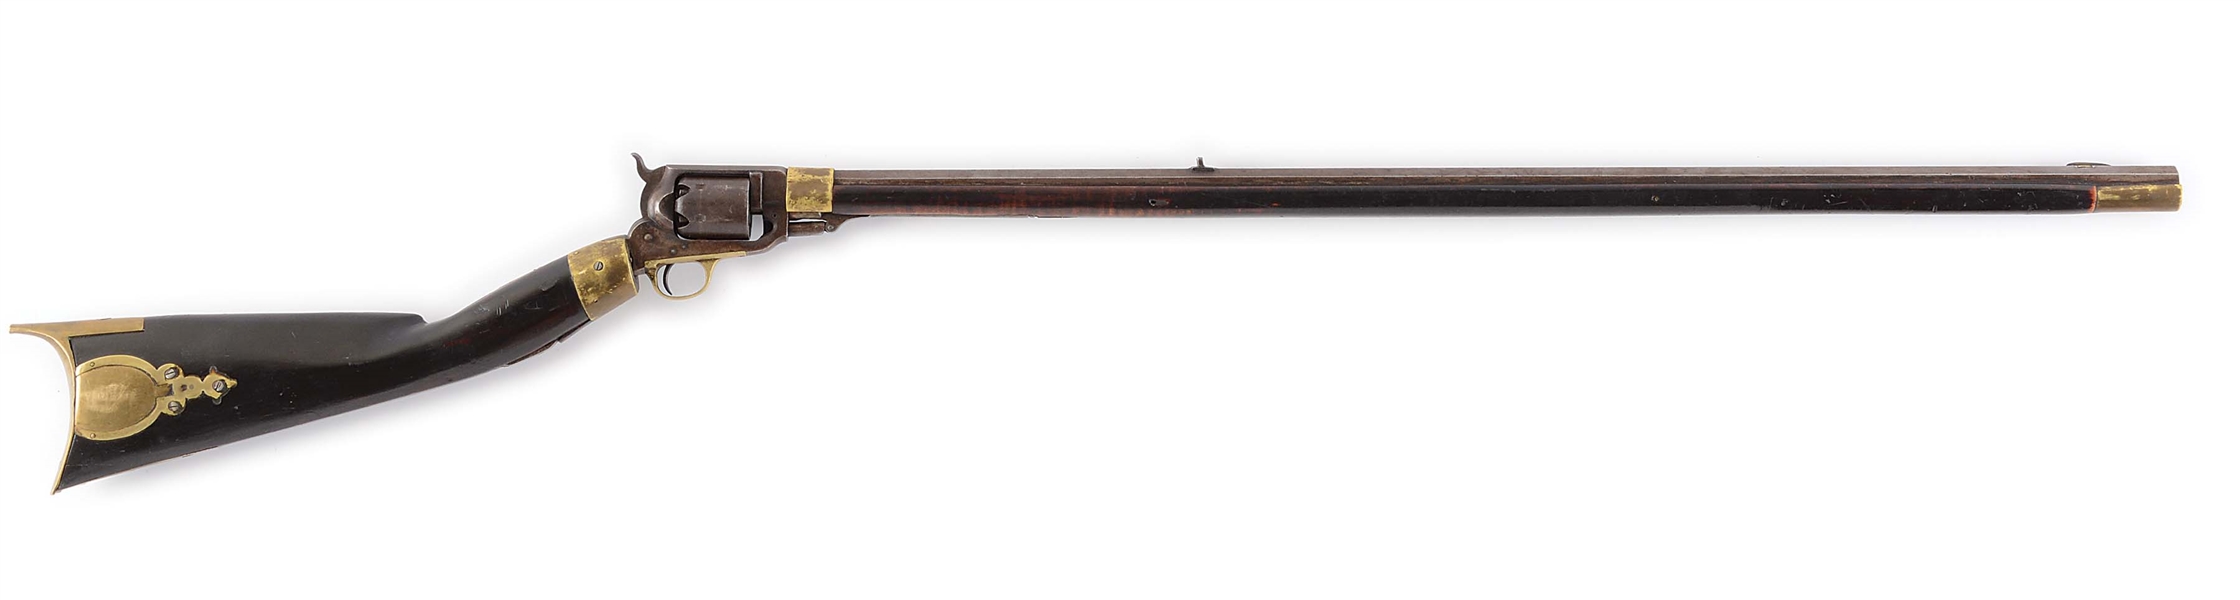 (A) UNIQUE REVOLVING PERCUSSION RIFLE BY KENTUCKY RIFLE MAKER BENJAMIN VORE.